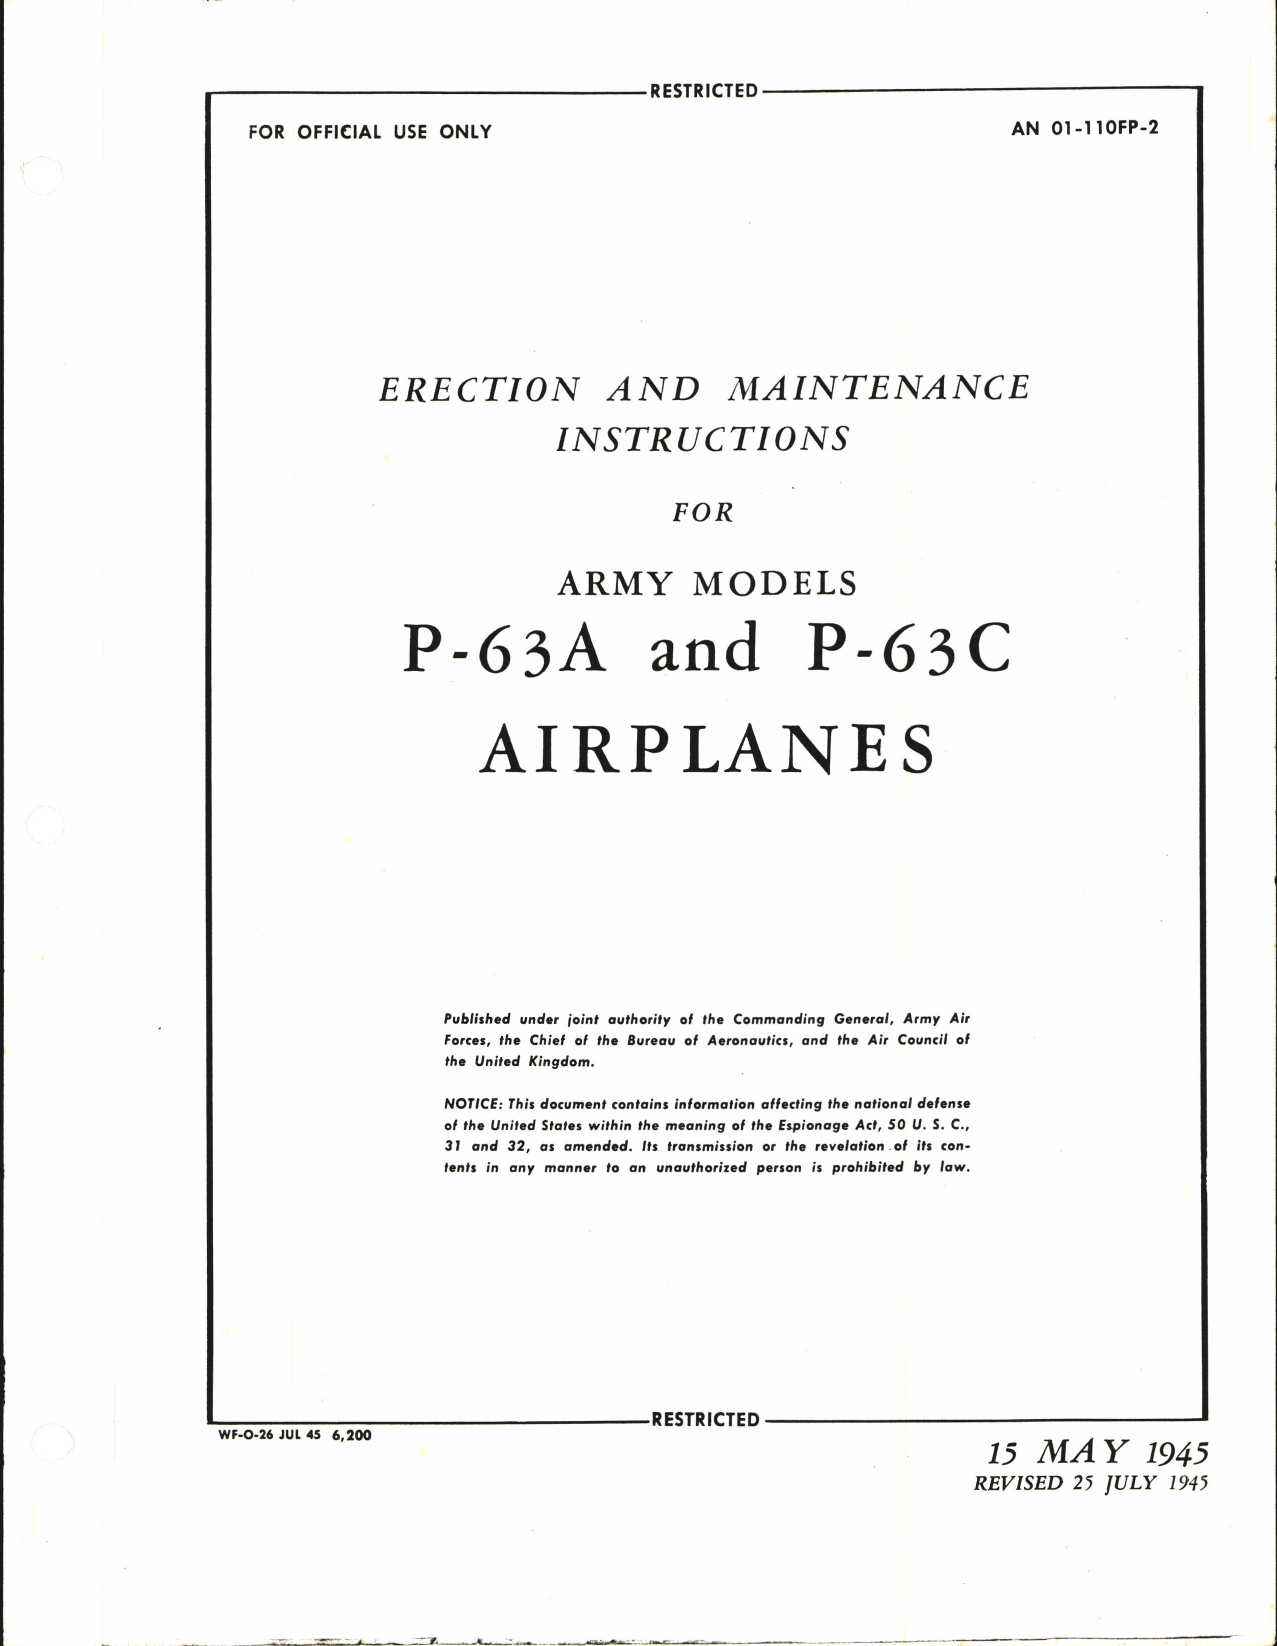 Sample page 1 from AirCorps Library document: Erection and Maintenance Instructions for Army Models P-63A and P-63C